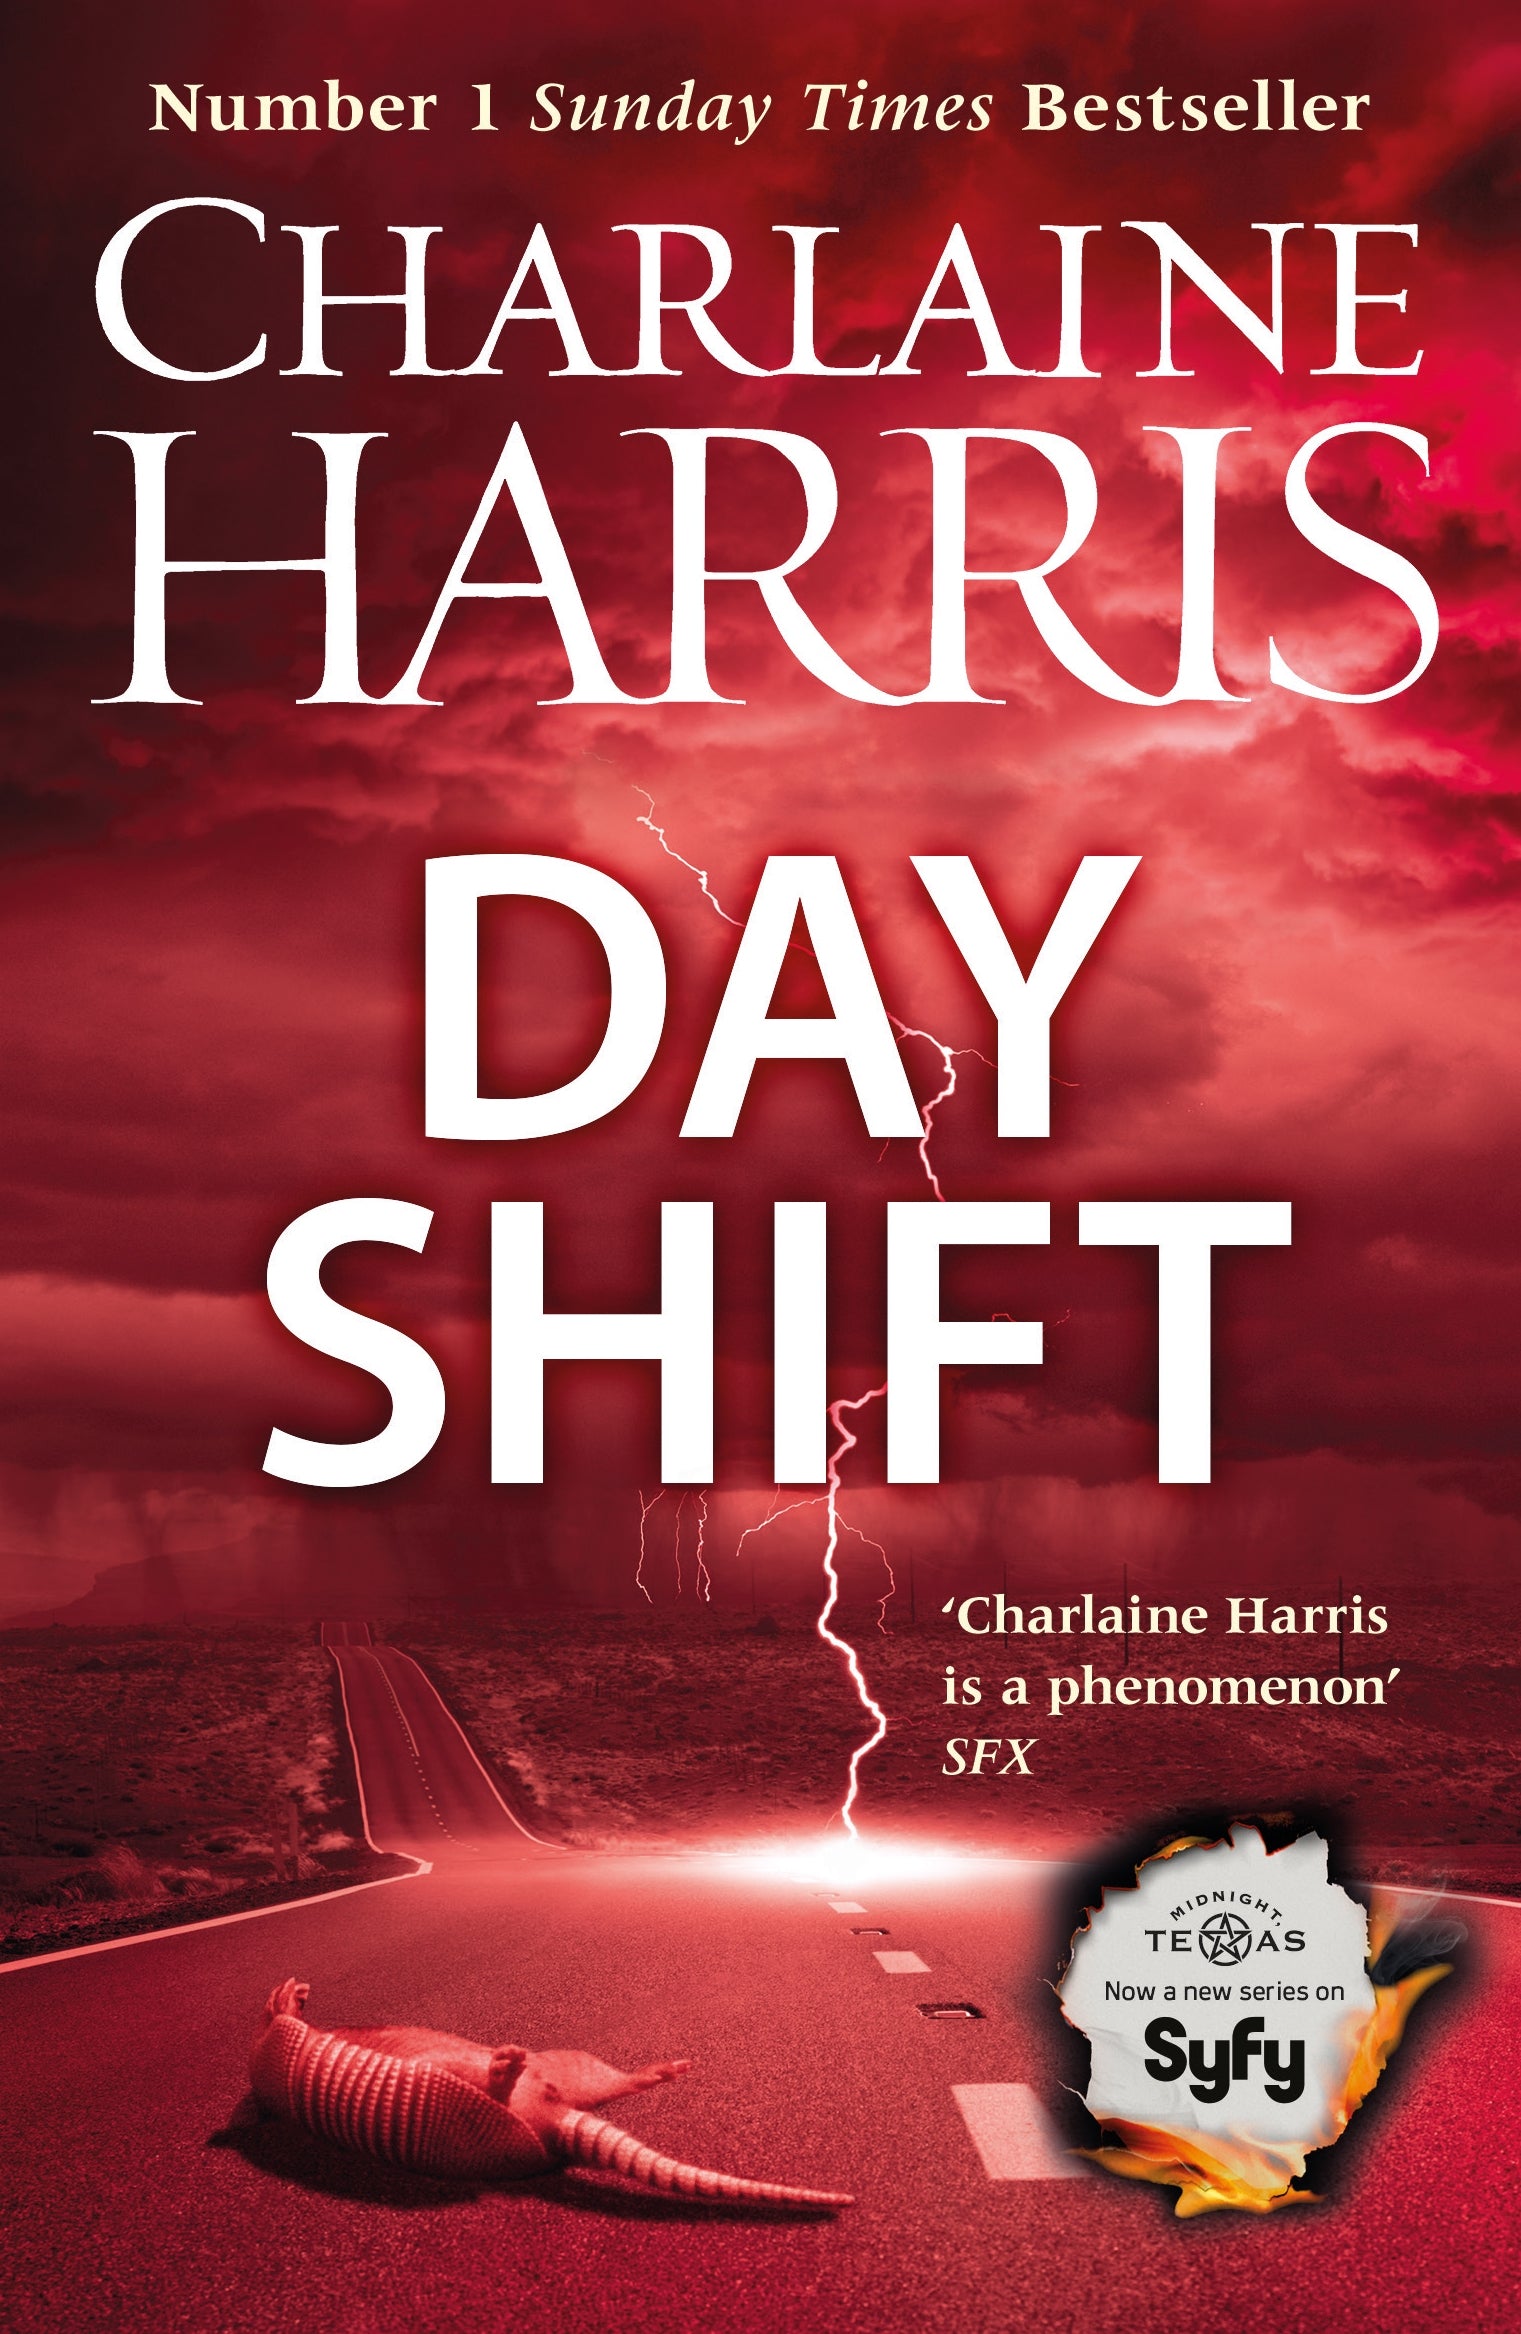 Day Shift by Charlaine Harris